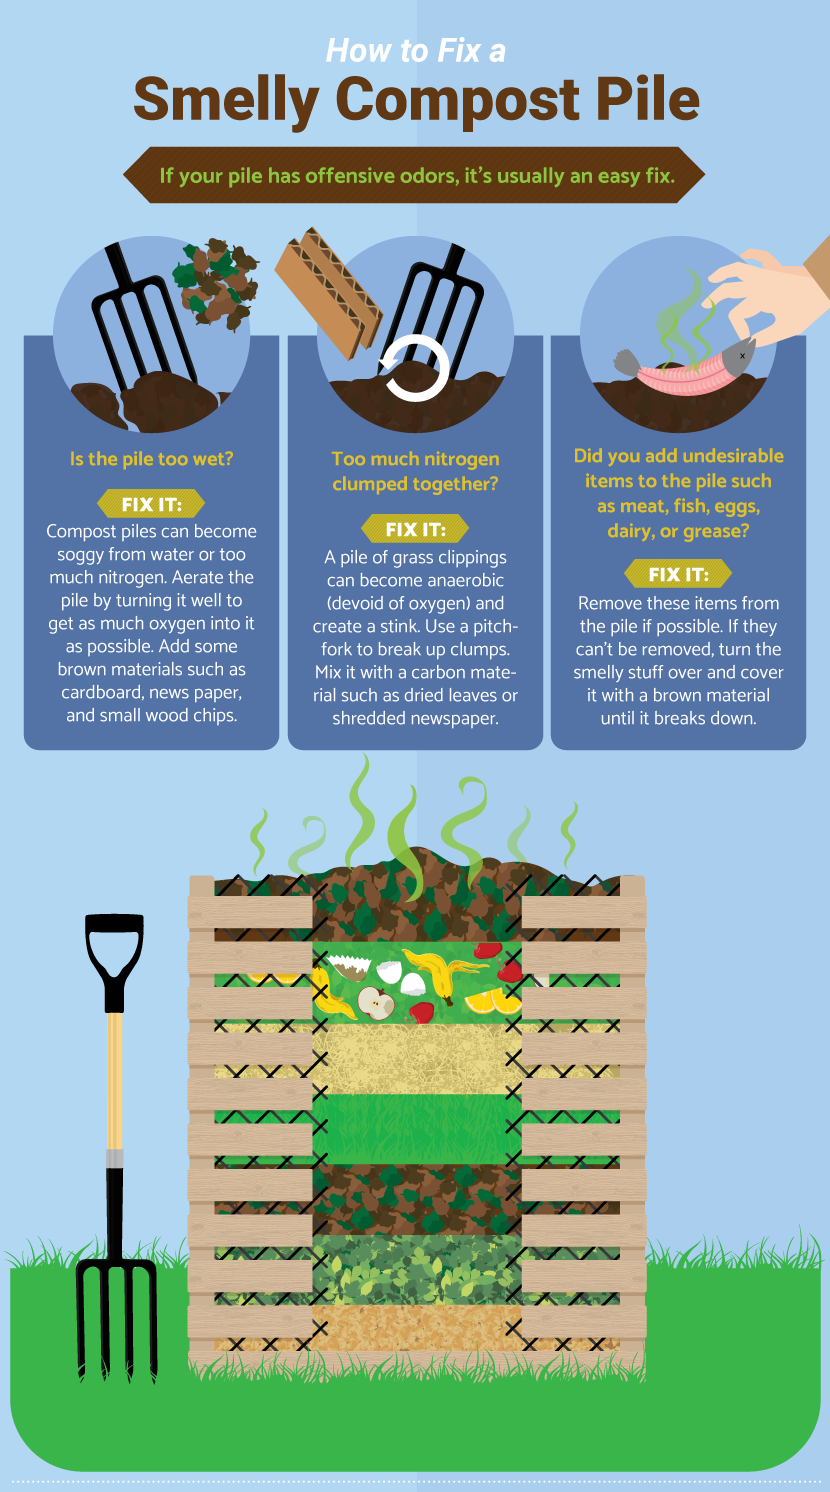 Composting: How to Fix a Smelly Compost Pile